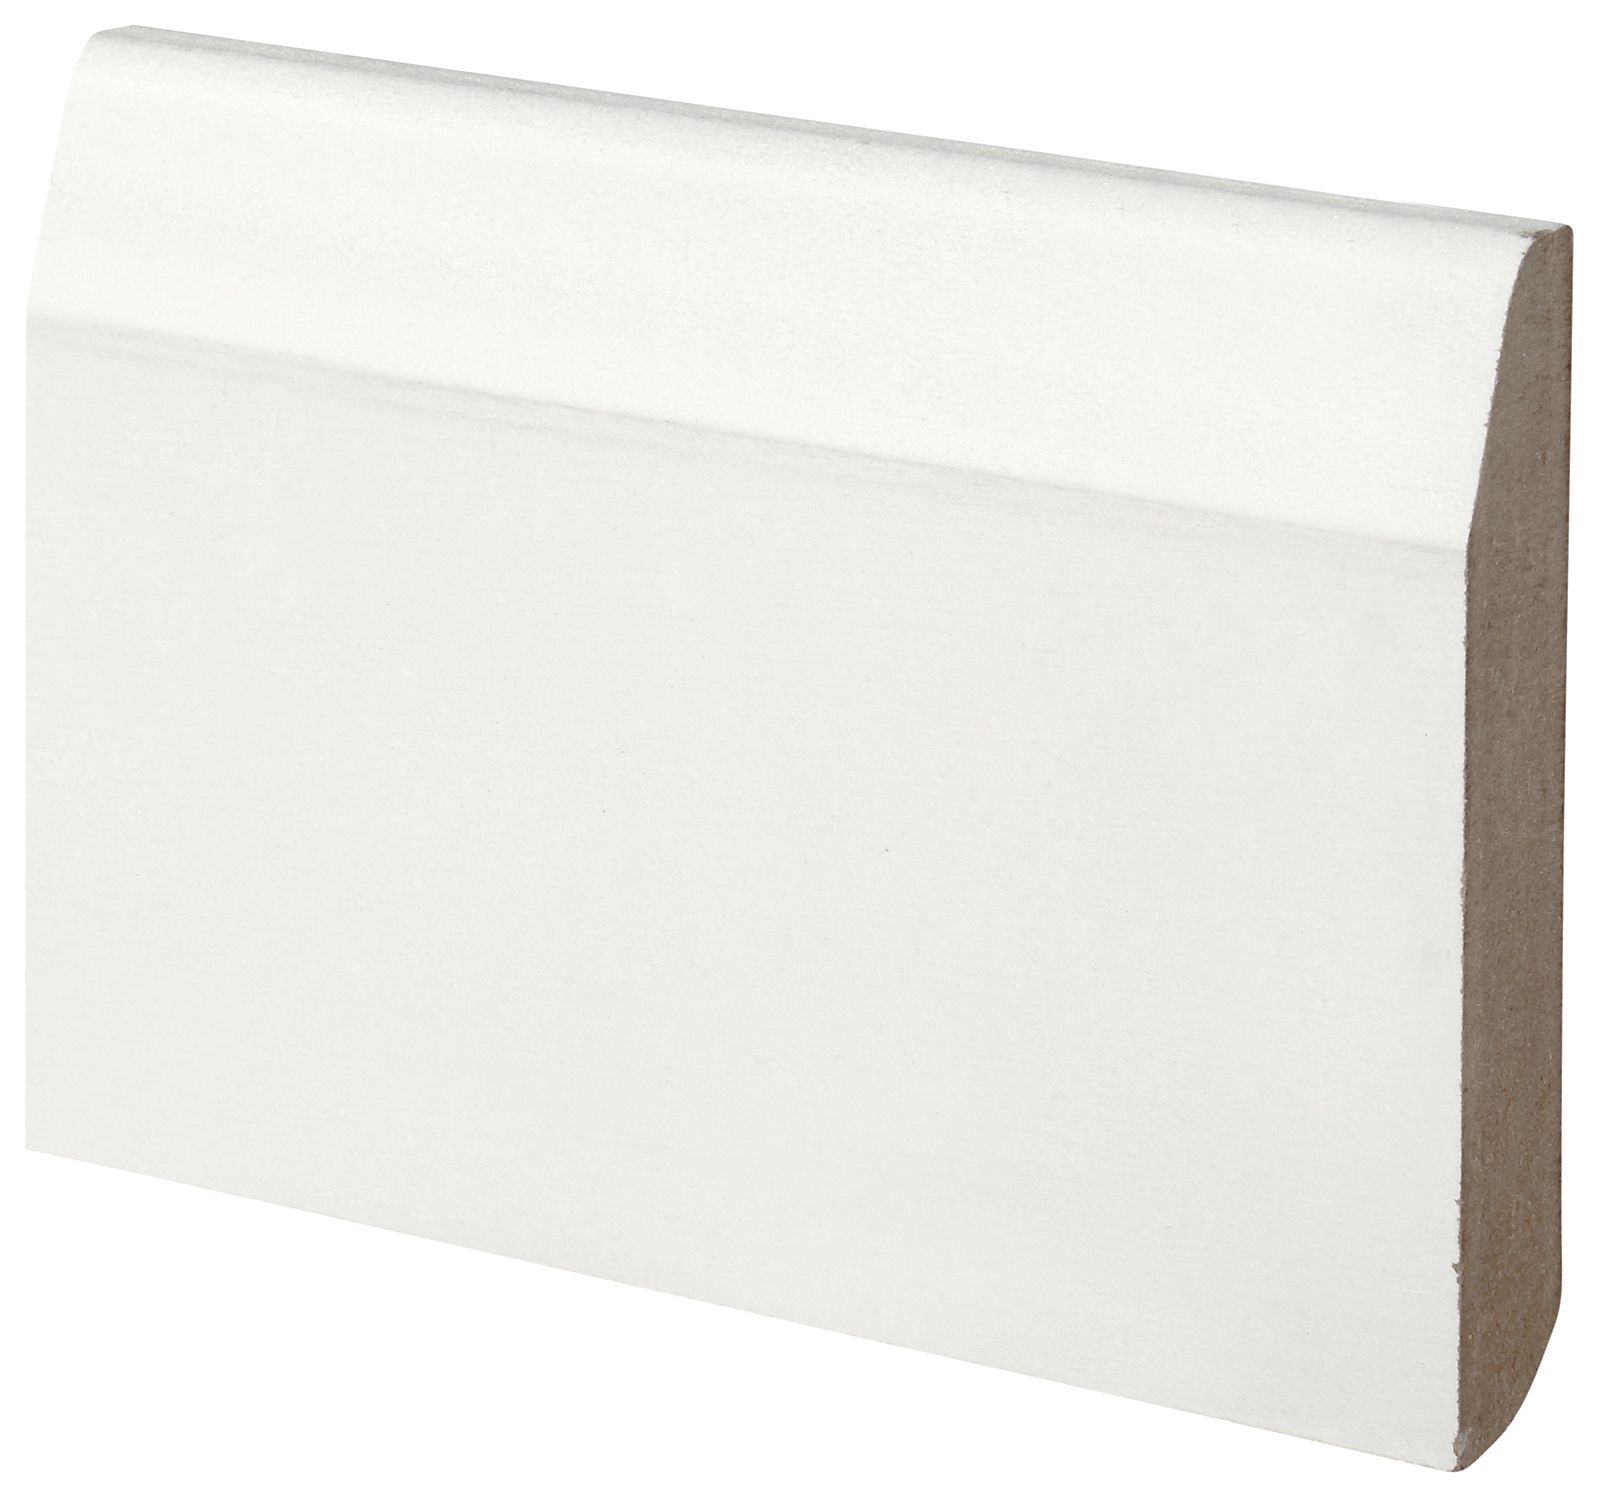 Image of Wickes Dual Purpose Chamfered/Bullnose Primed MDF Skirting - 14.5 x 94 x 3660mm